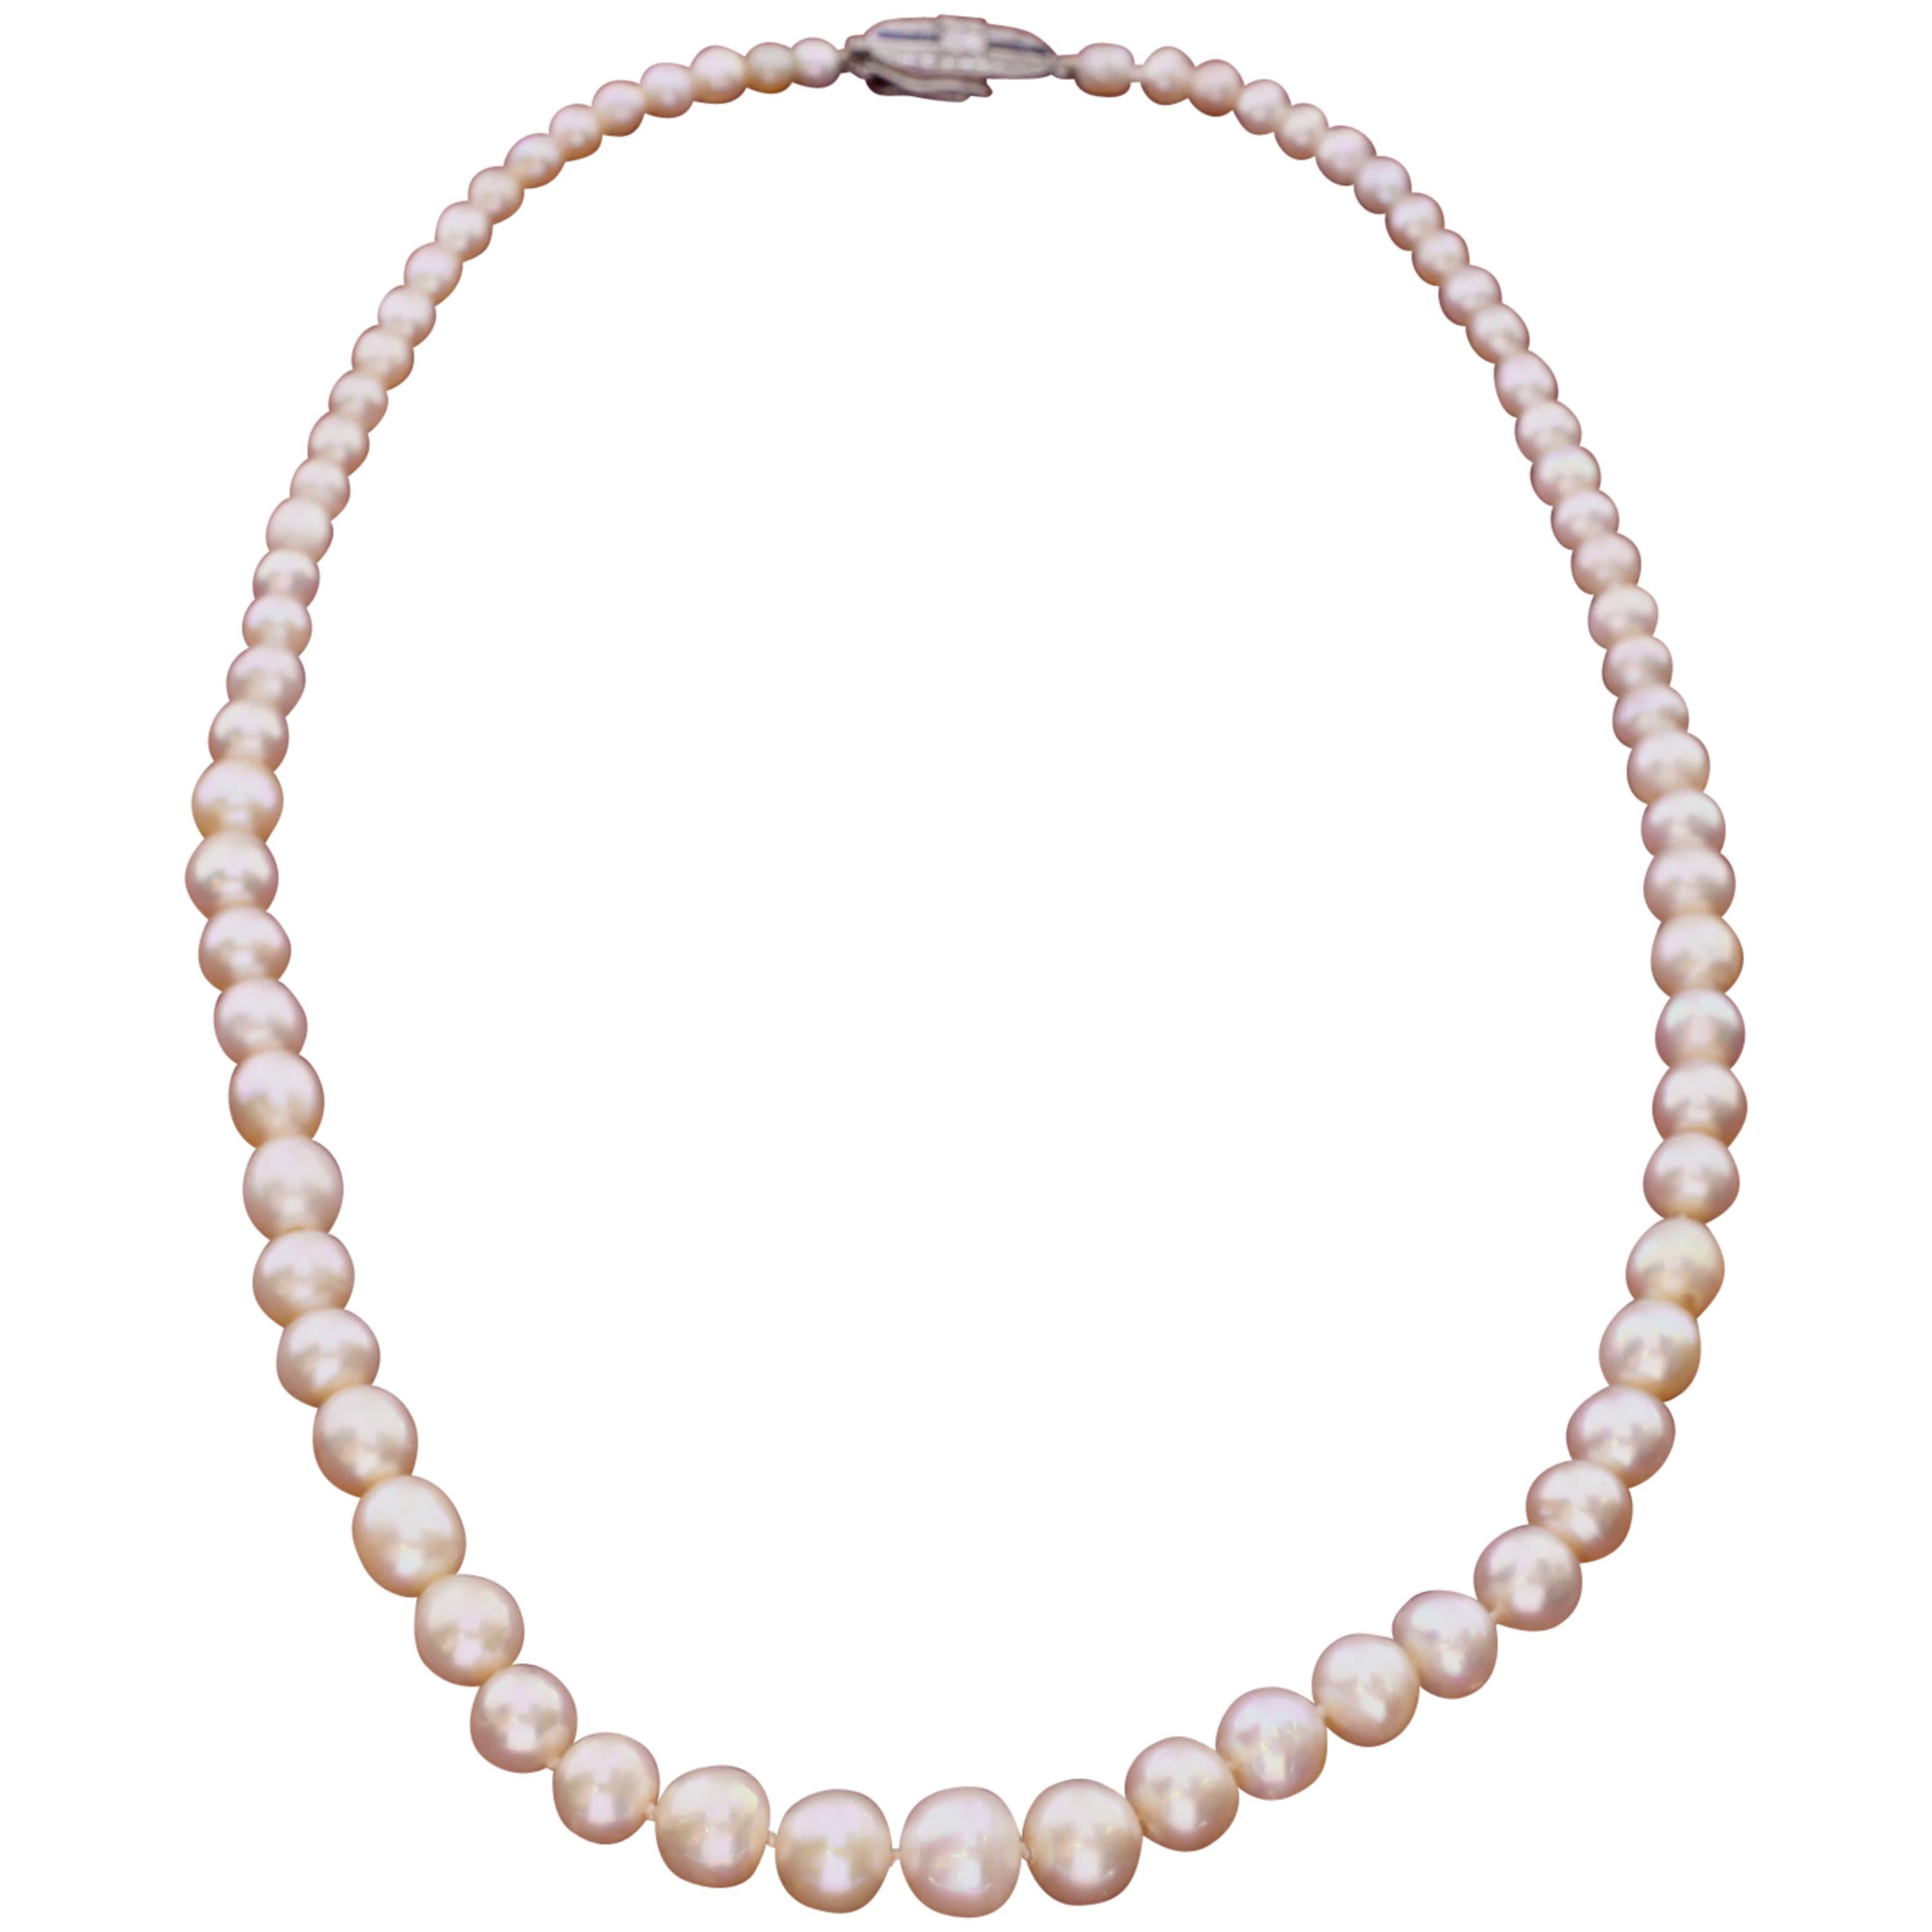 72 Natural Saltwater Pearls on a Silk Strand For Sale